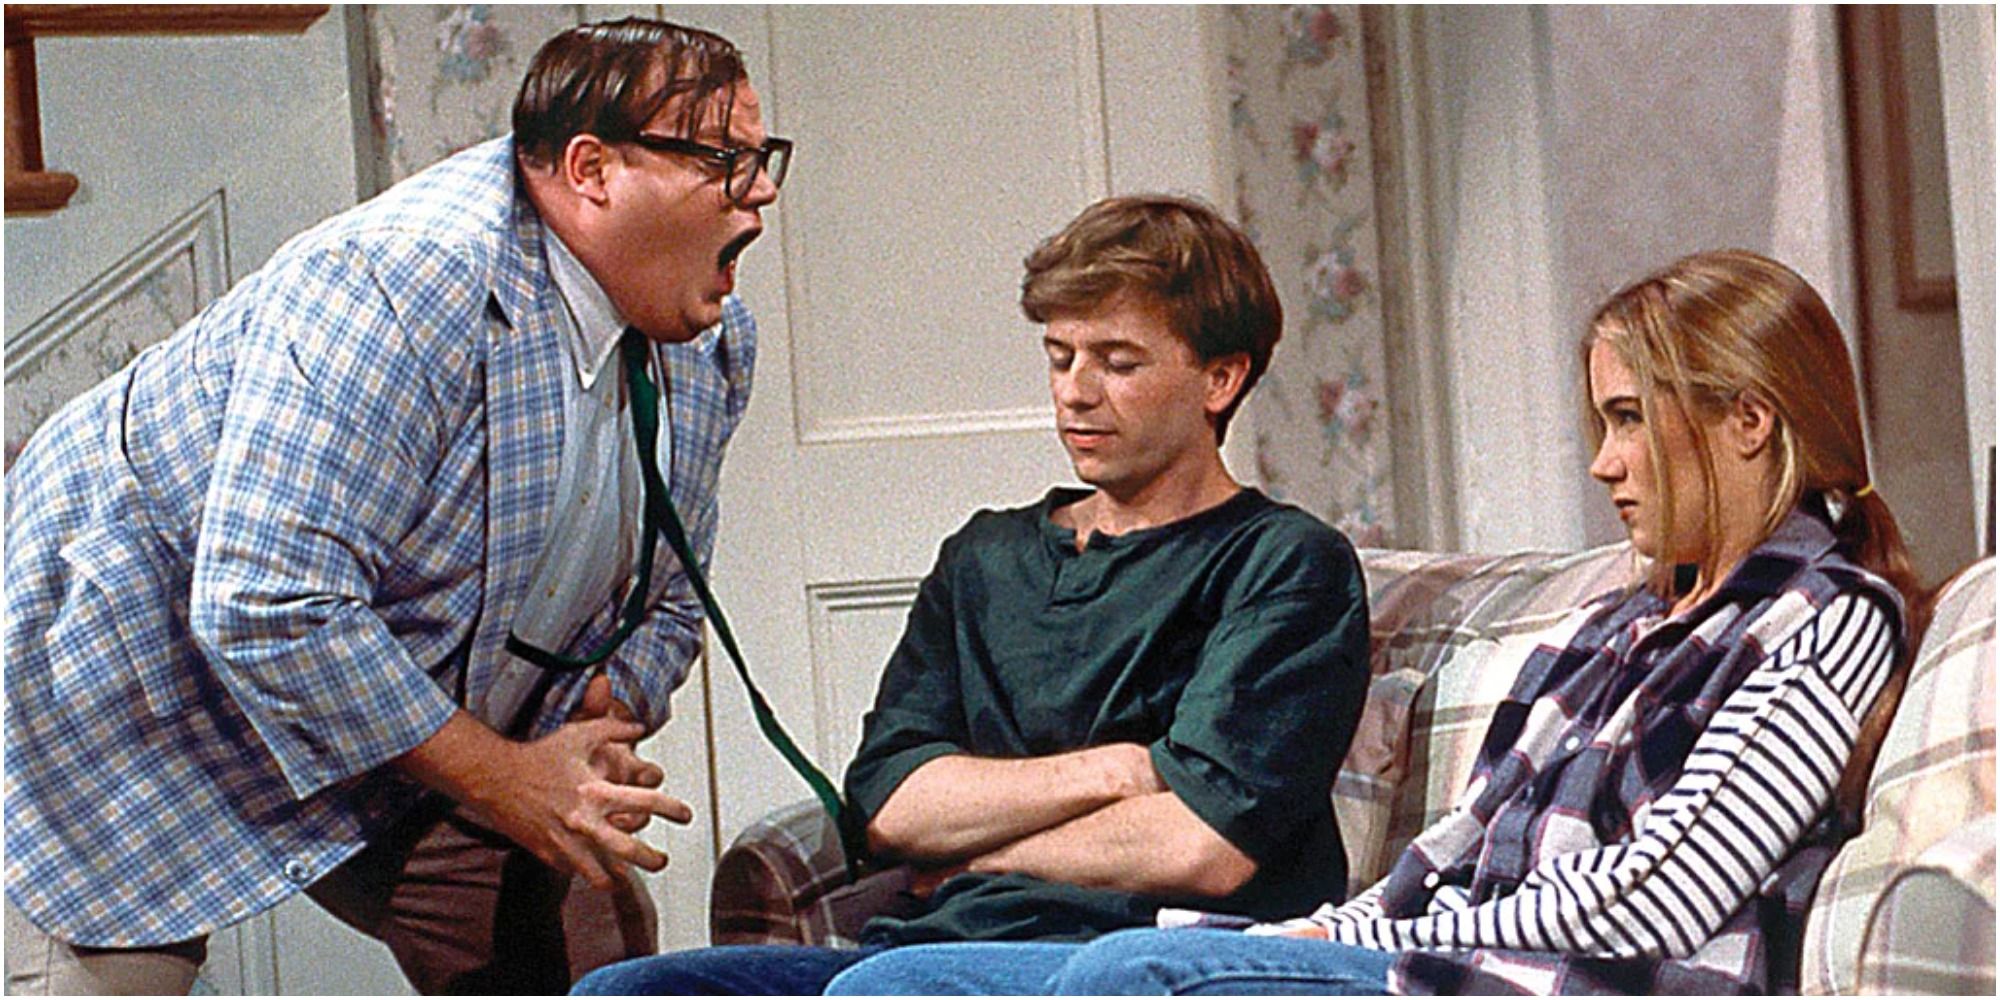 A screenshot of Chris Farley's Matt Foley scolding at David Spade and host Christina Applegate in the &quot;Motivational Speaker&quot; sketch from Saturday Night Live